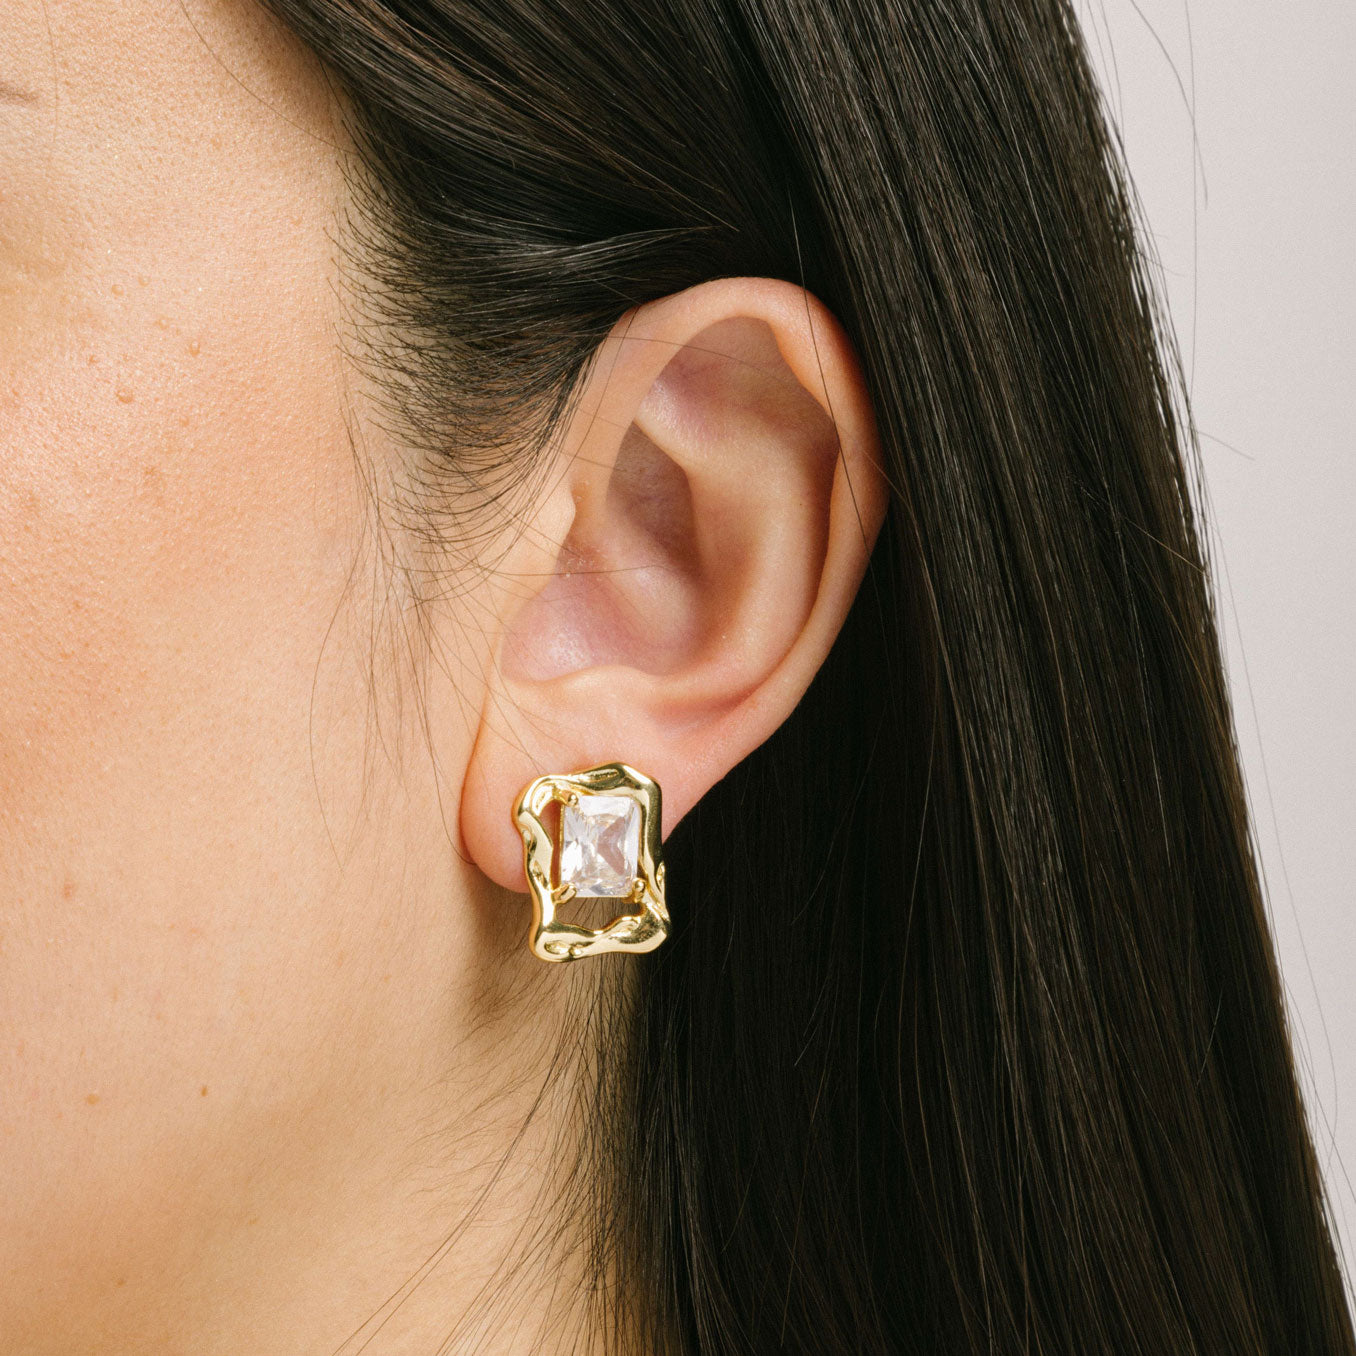 A model wearing the Valerie Clip On Earrings in Gold feature a padded clip-on closure for secure hold and comfortable wear up to 12 hours. These earrings are crafted with gold tone copper alloy and cubic zirconia, and can be worn by all ear types, including thick/large ears, sensitive ears, small/thin ears, and stretched/healing ears. Please note: one pair is included.